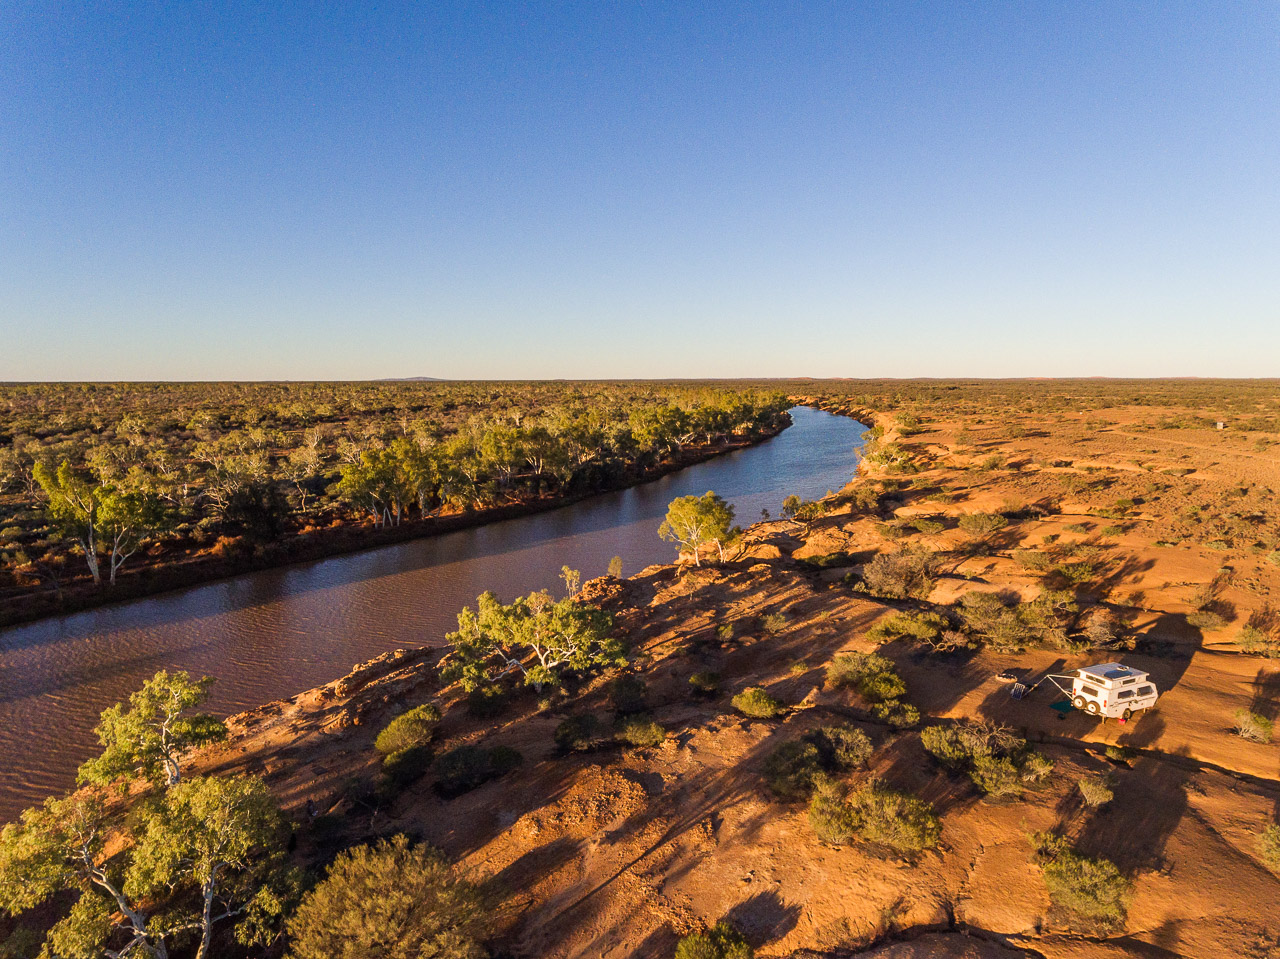 The Murchison River flowing and brown after the recent rains and the run-off